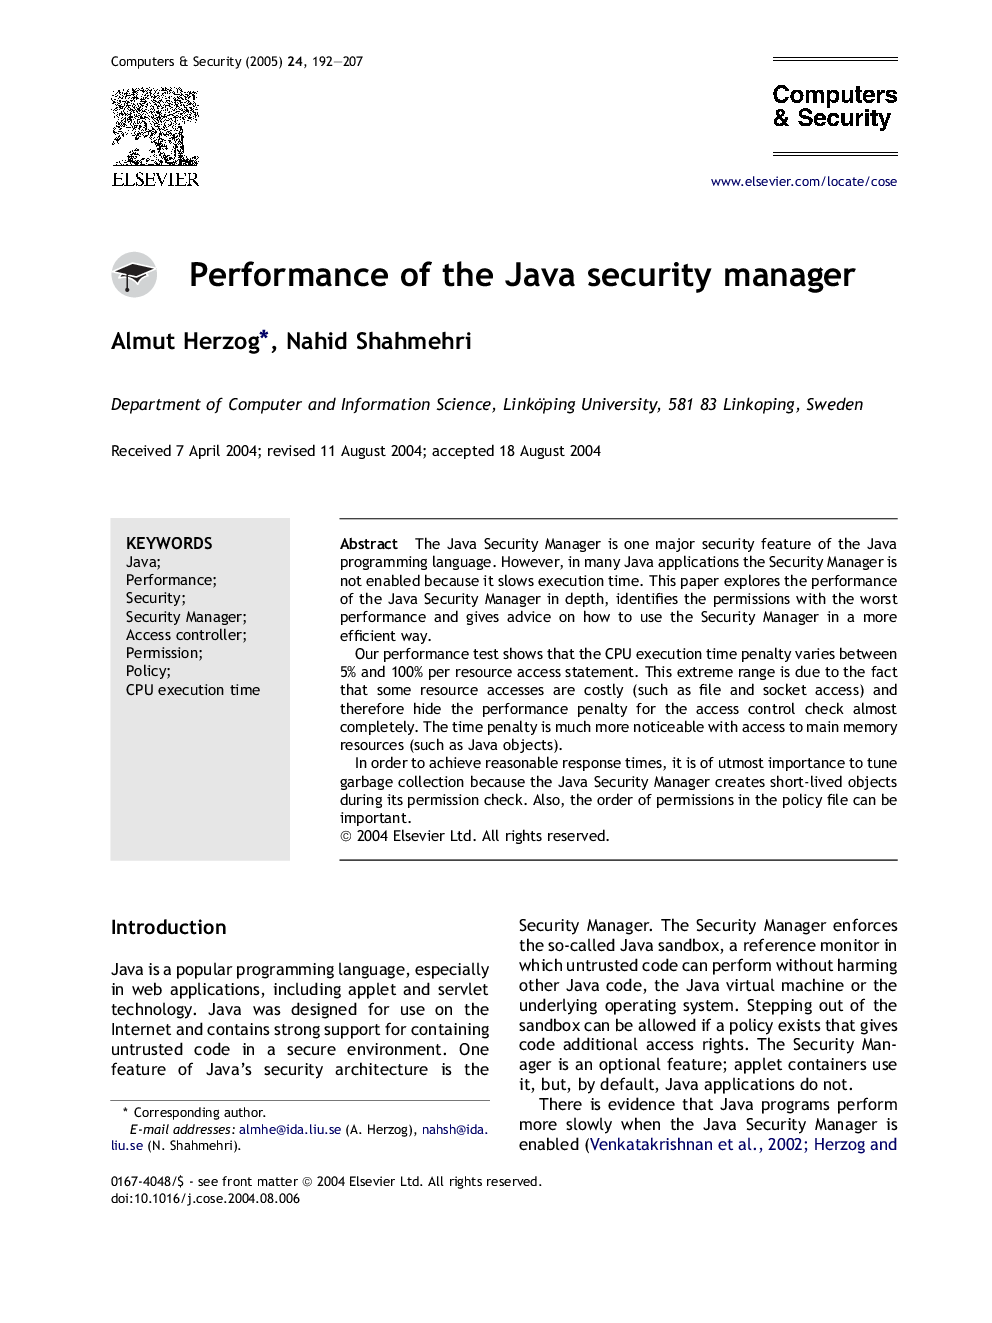 Performance of the Java security manager